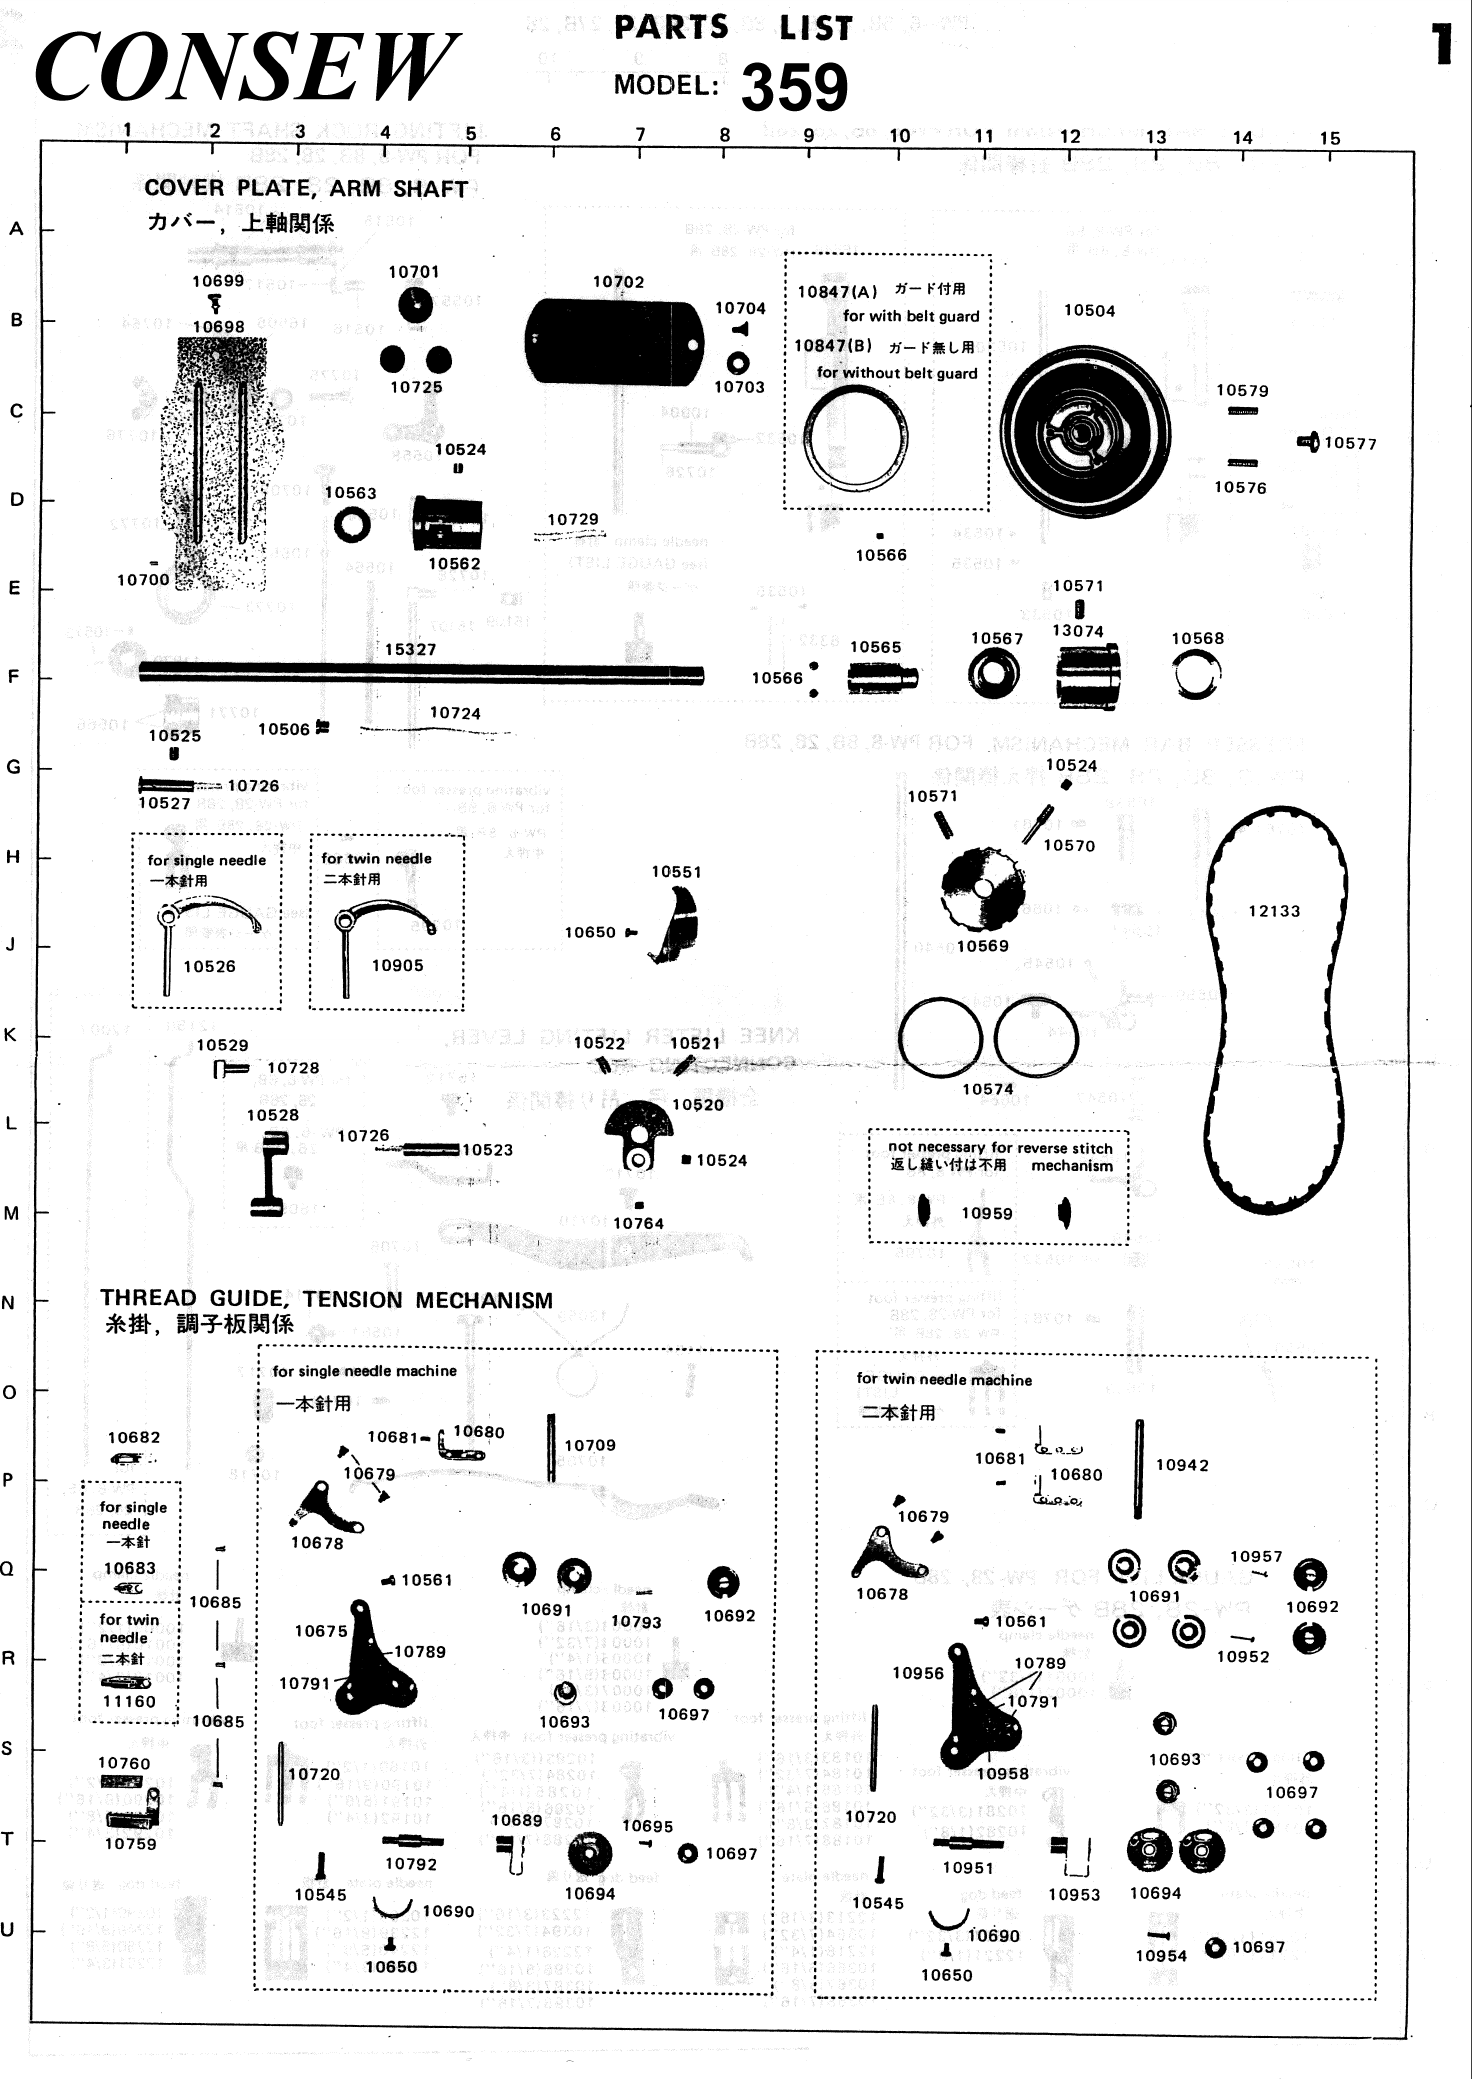 Page 1 of 6 - ACE&EASTMAN Consew 359 Parts Book Image To PDF Conversion Tools User Manual